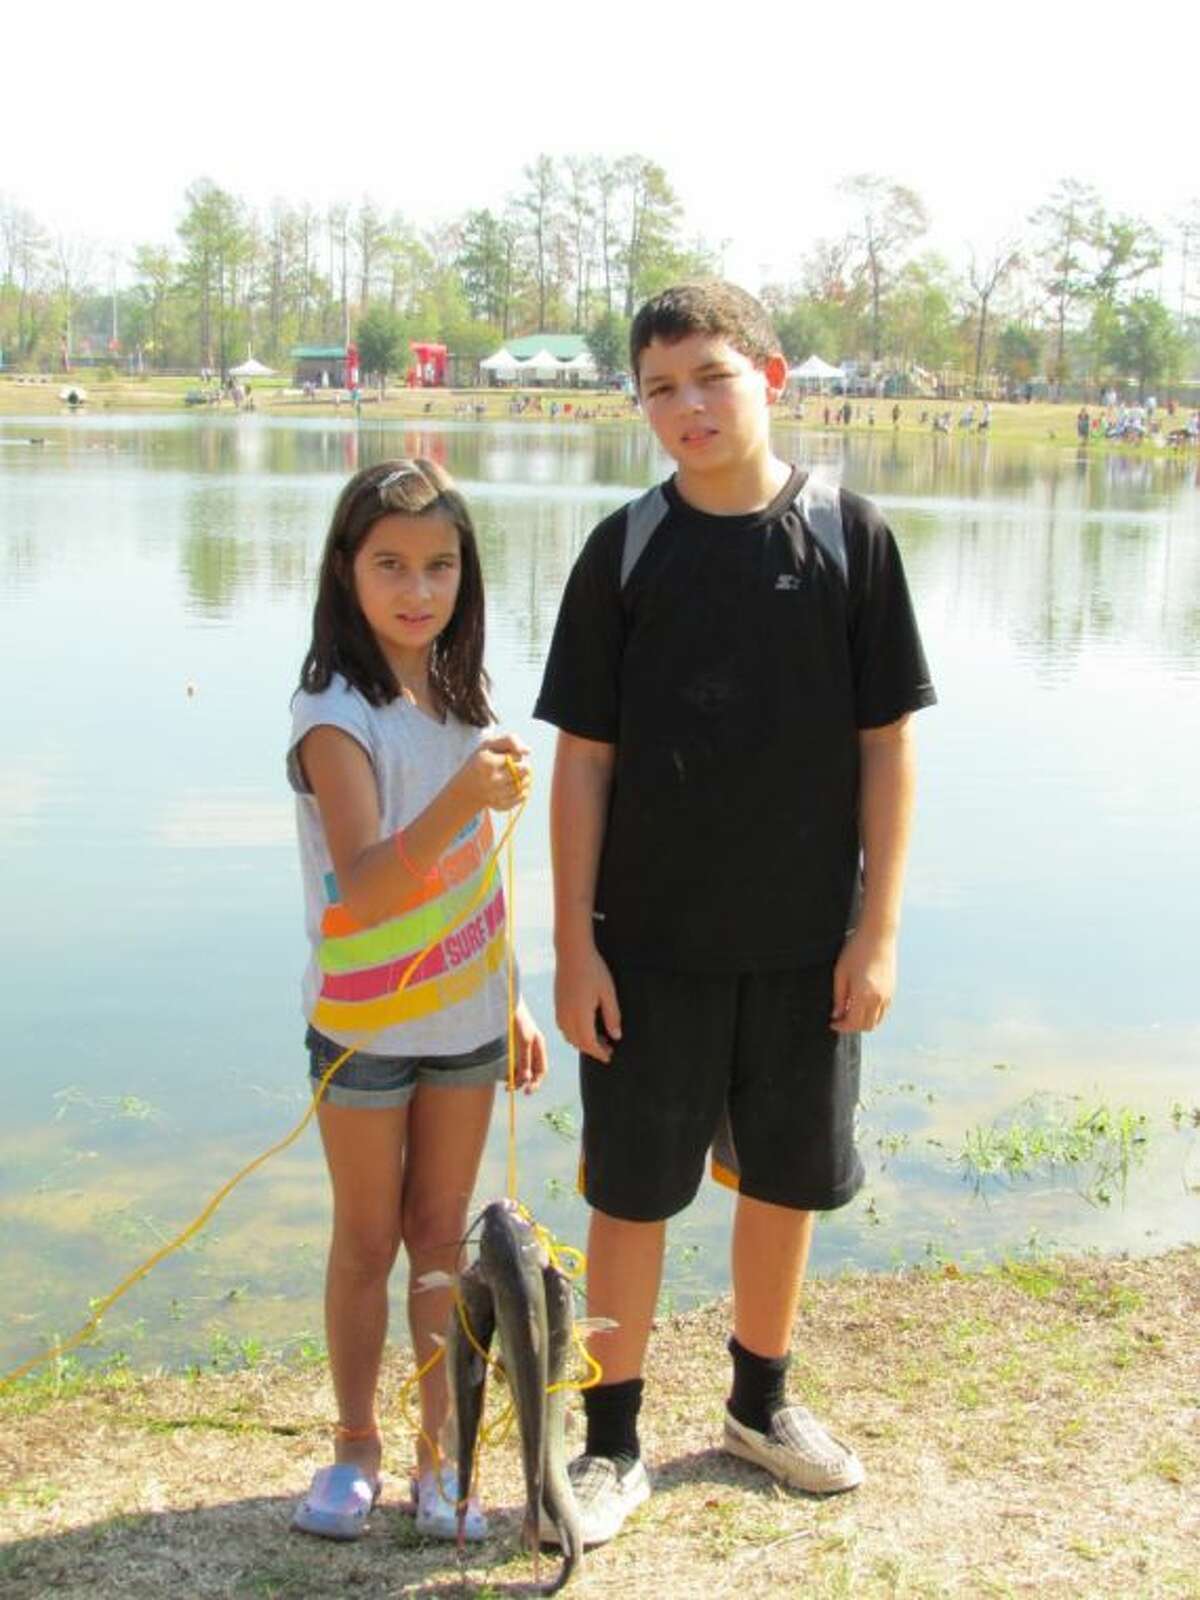 Join the City of Conroe Parks and Recreation Department for the 14th annual KidFish from 9 a.m. to noon this Saturday at Carl Barton Jr. Park. This event is FREE to children 16 and younger.